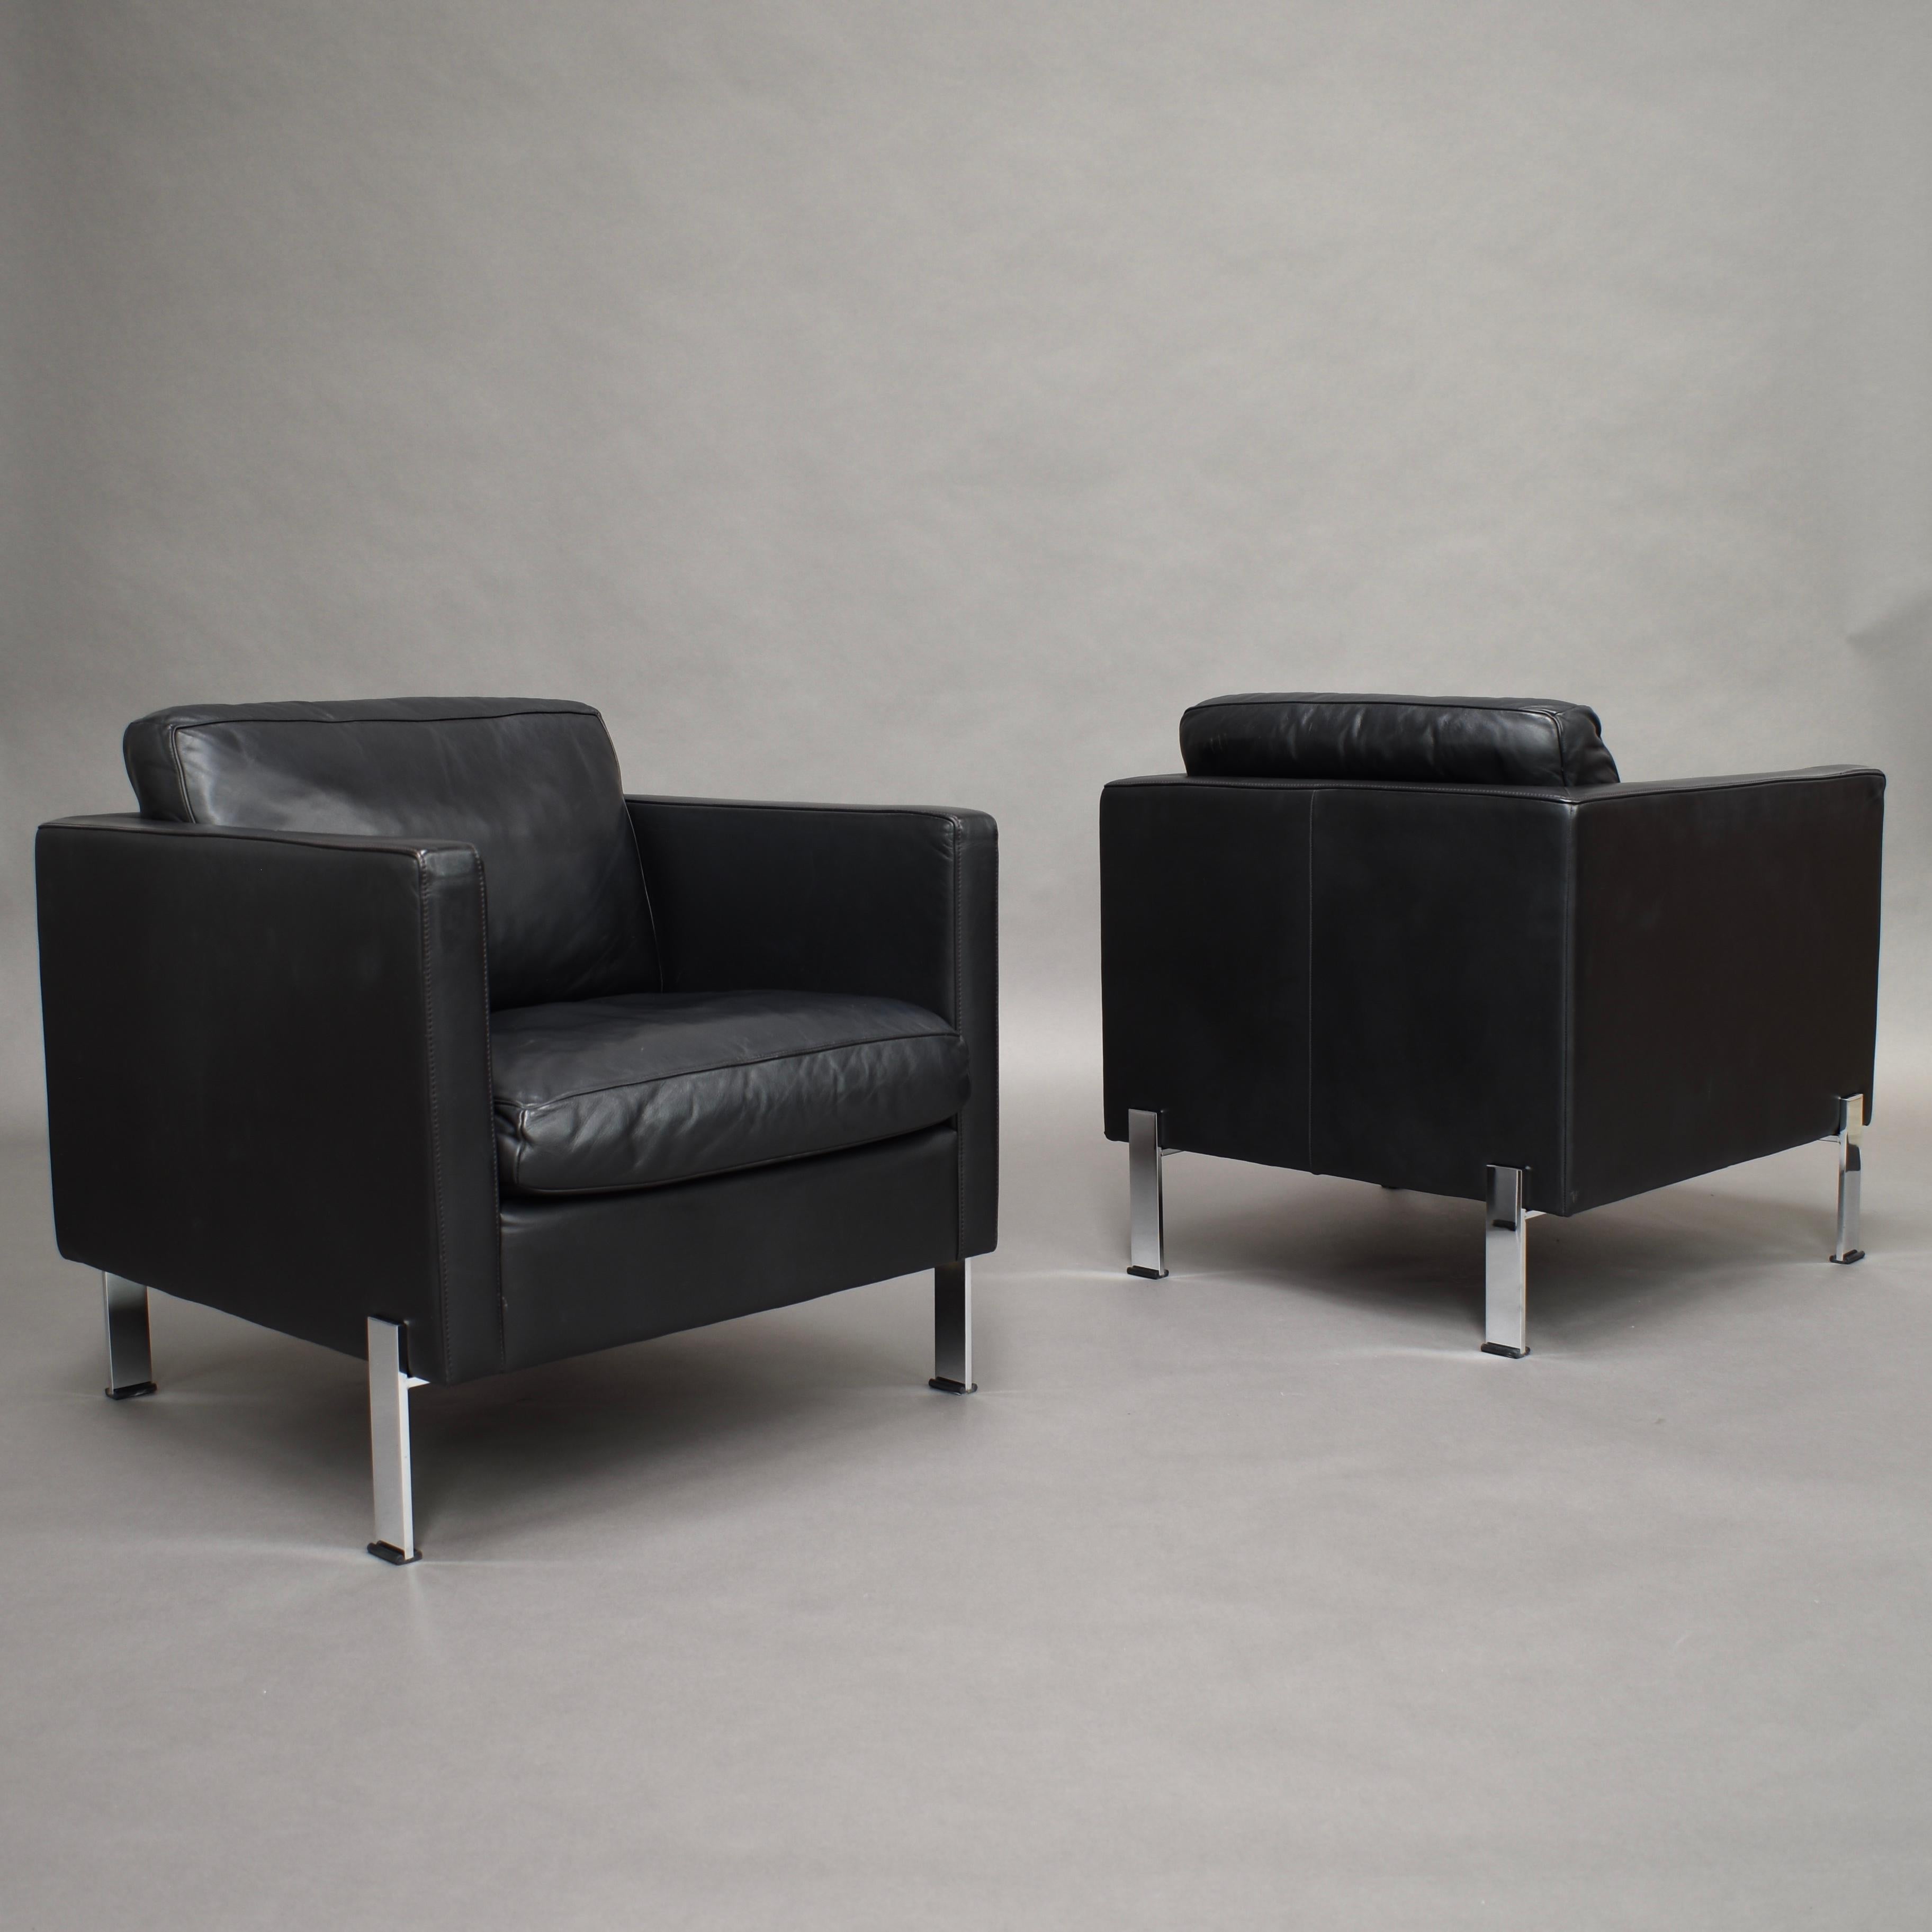 Sophisticated pair of black leather arm lounge chairs by De Sede model ds-118 - Switzerland. 
De Sede only manufactures with the highest quality leather and other materials.

Designer: De Sede Design Team
Manufacturer: De Sede
Country: